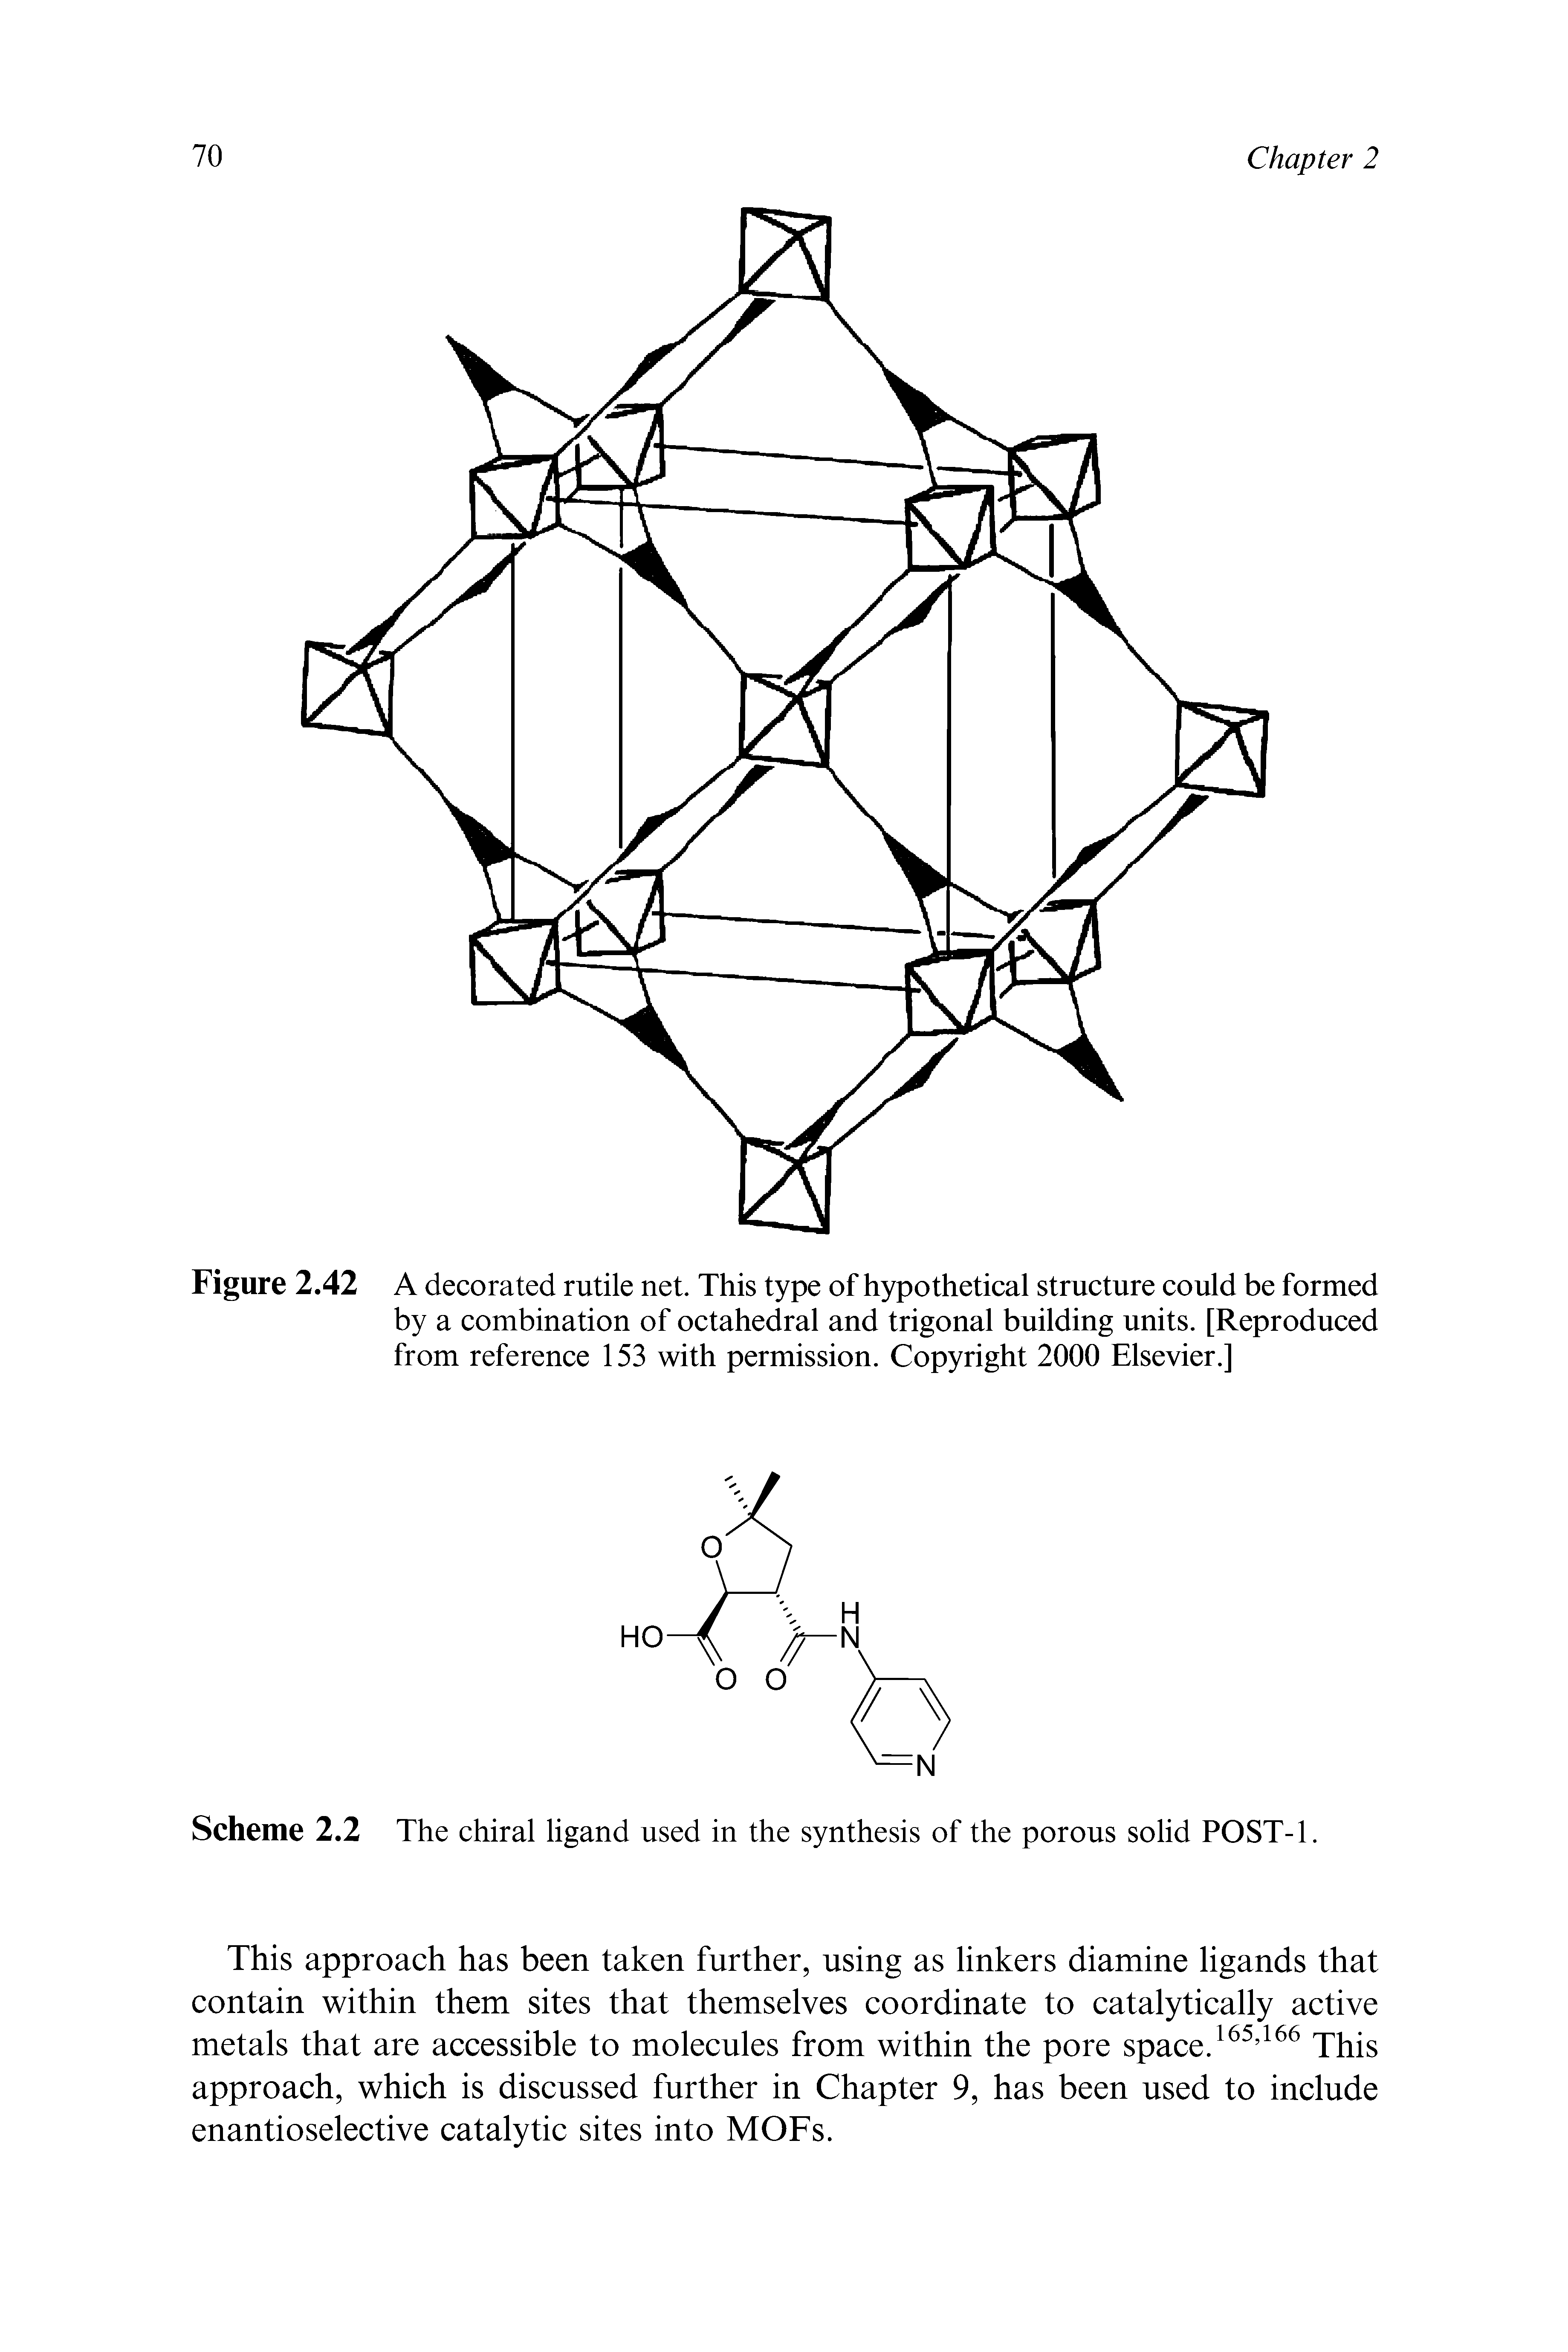 Figure 2.42 A decorated rutile net. This type of hypothetical structure could be formed by a combination of octahedral and trigonal building units. [Reproduced from reference 153 with permission. Copyright 2000 Elsevier.]...